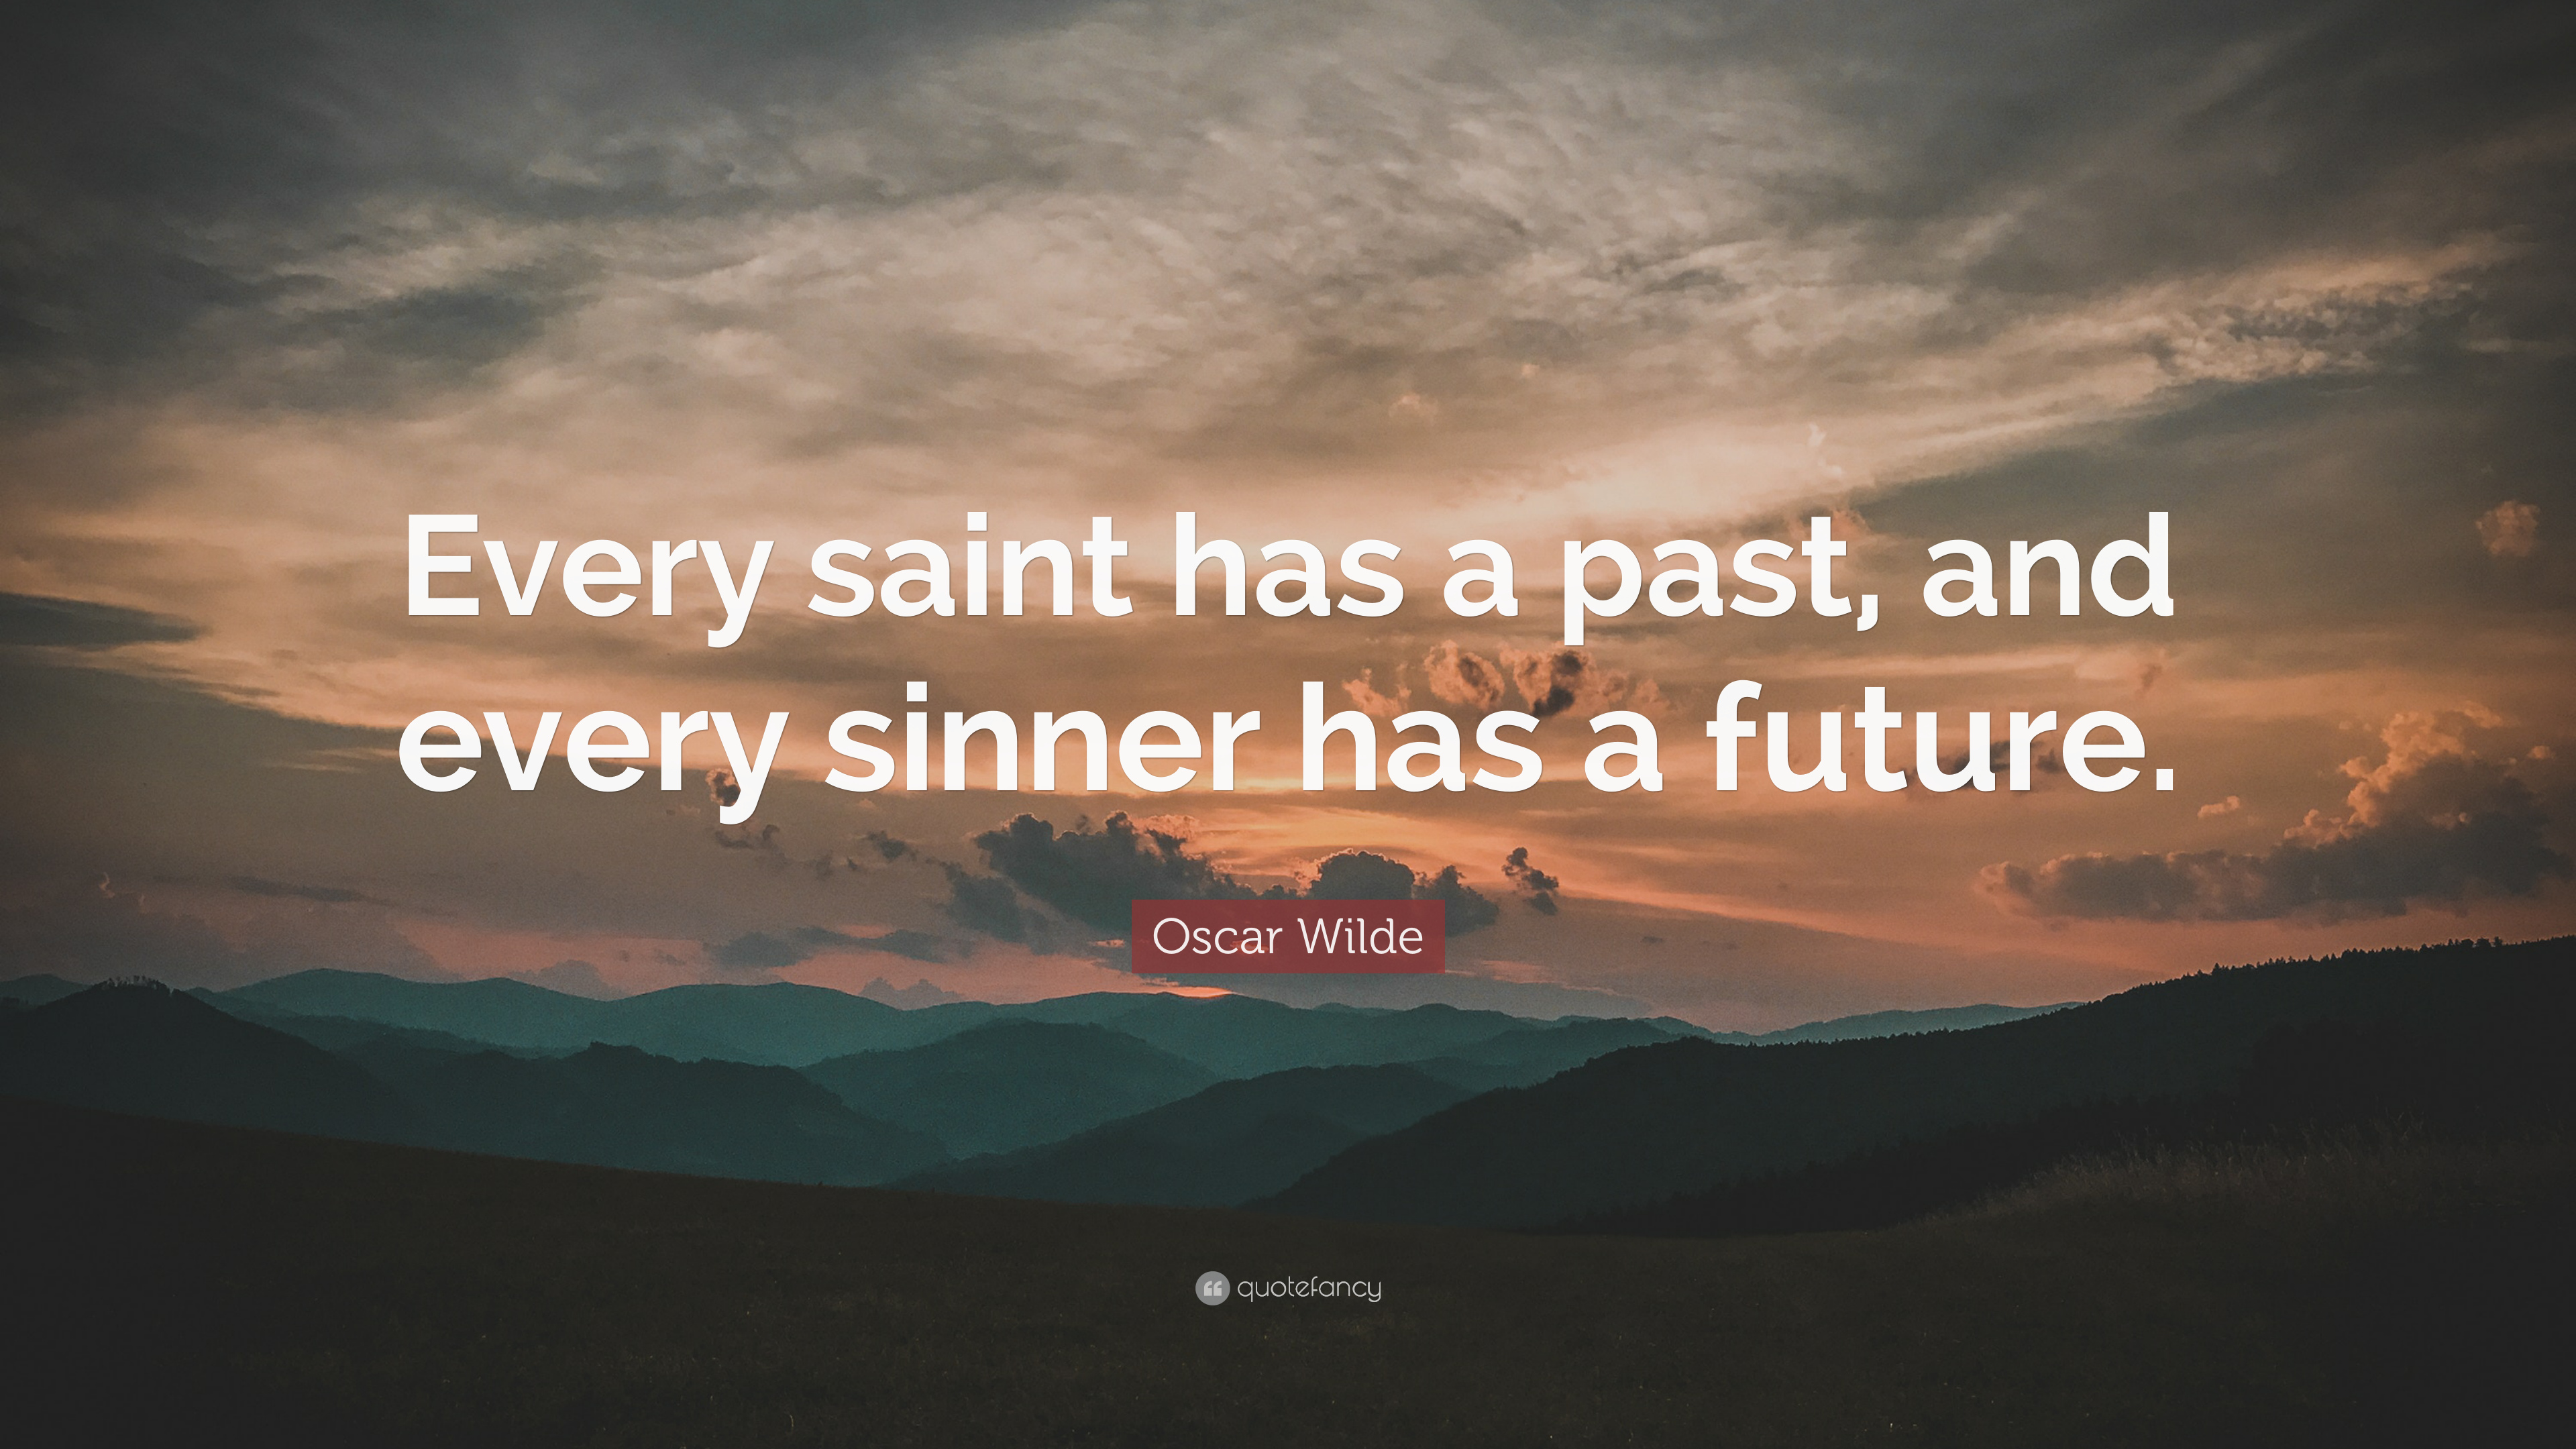 Oscar Wilde Quote: “Every saint has a past, and every sinner has a